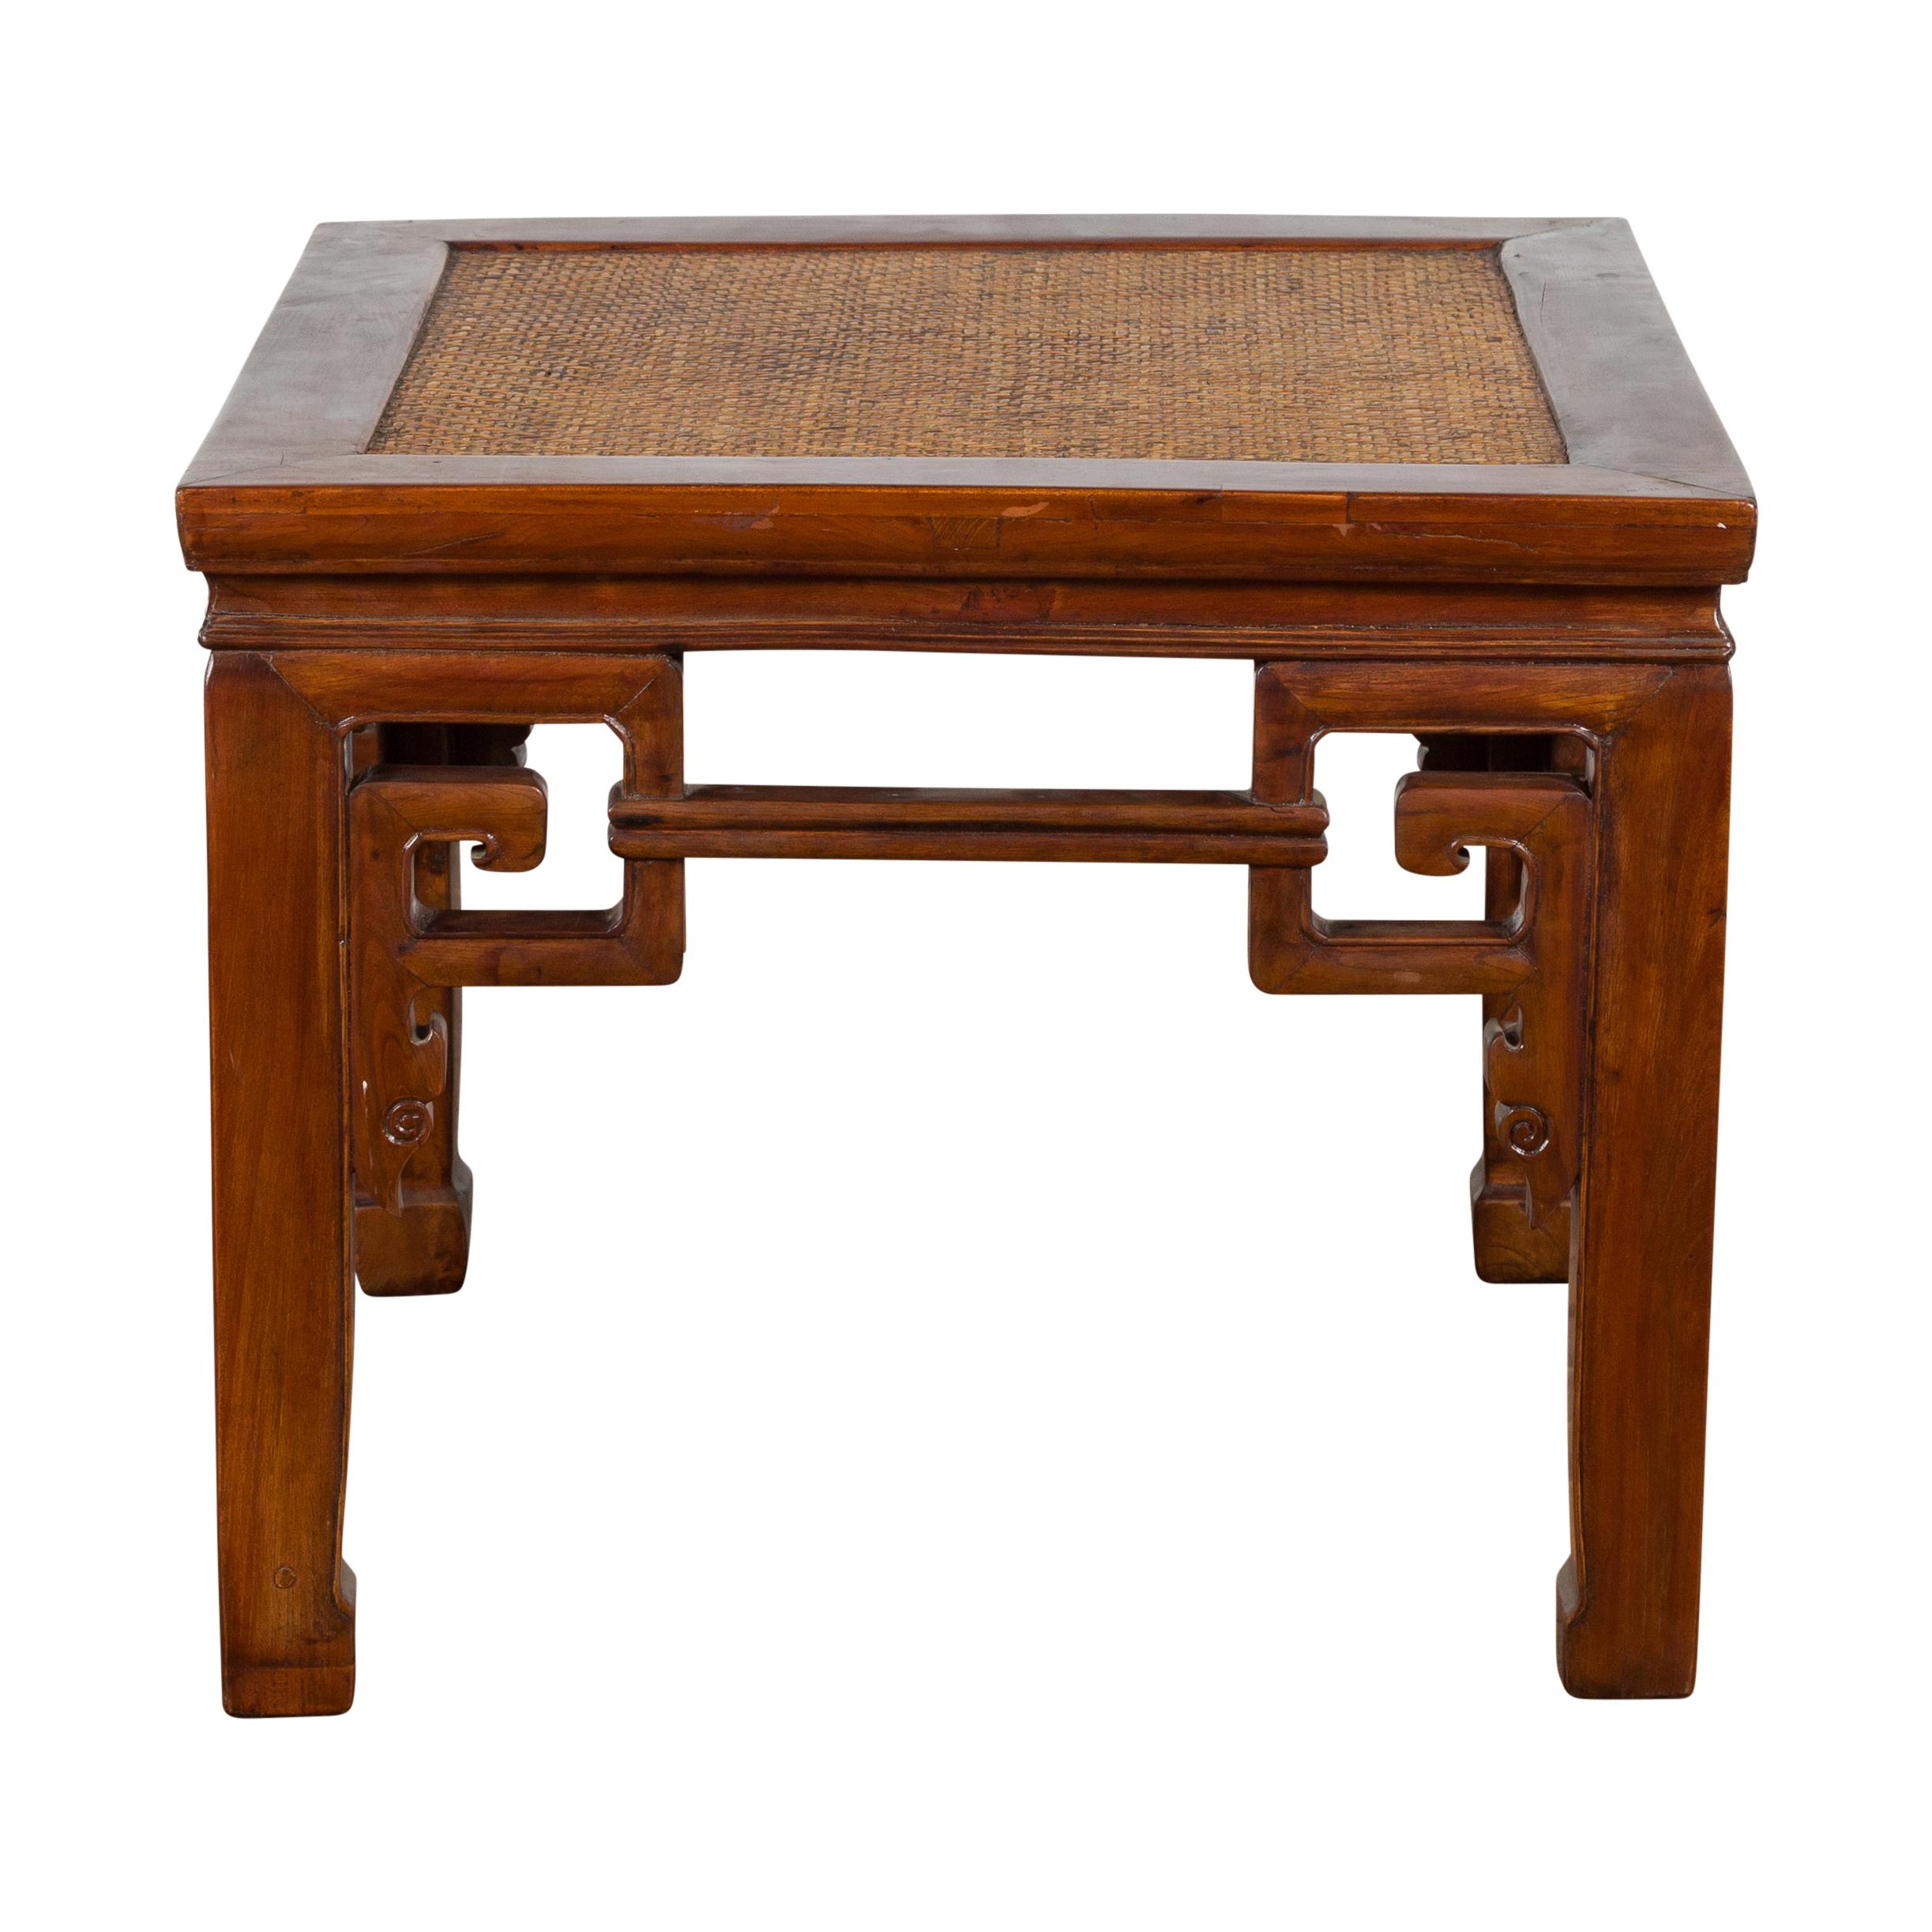 Small antique Chinese Qing Dynasty period elm wood stool from the 19th century with carved scrolling spandrels, woven rattan top and horse hoof feet, that could be used as a drinks table as well. Created in China during the Qing Dynasty period in